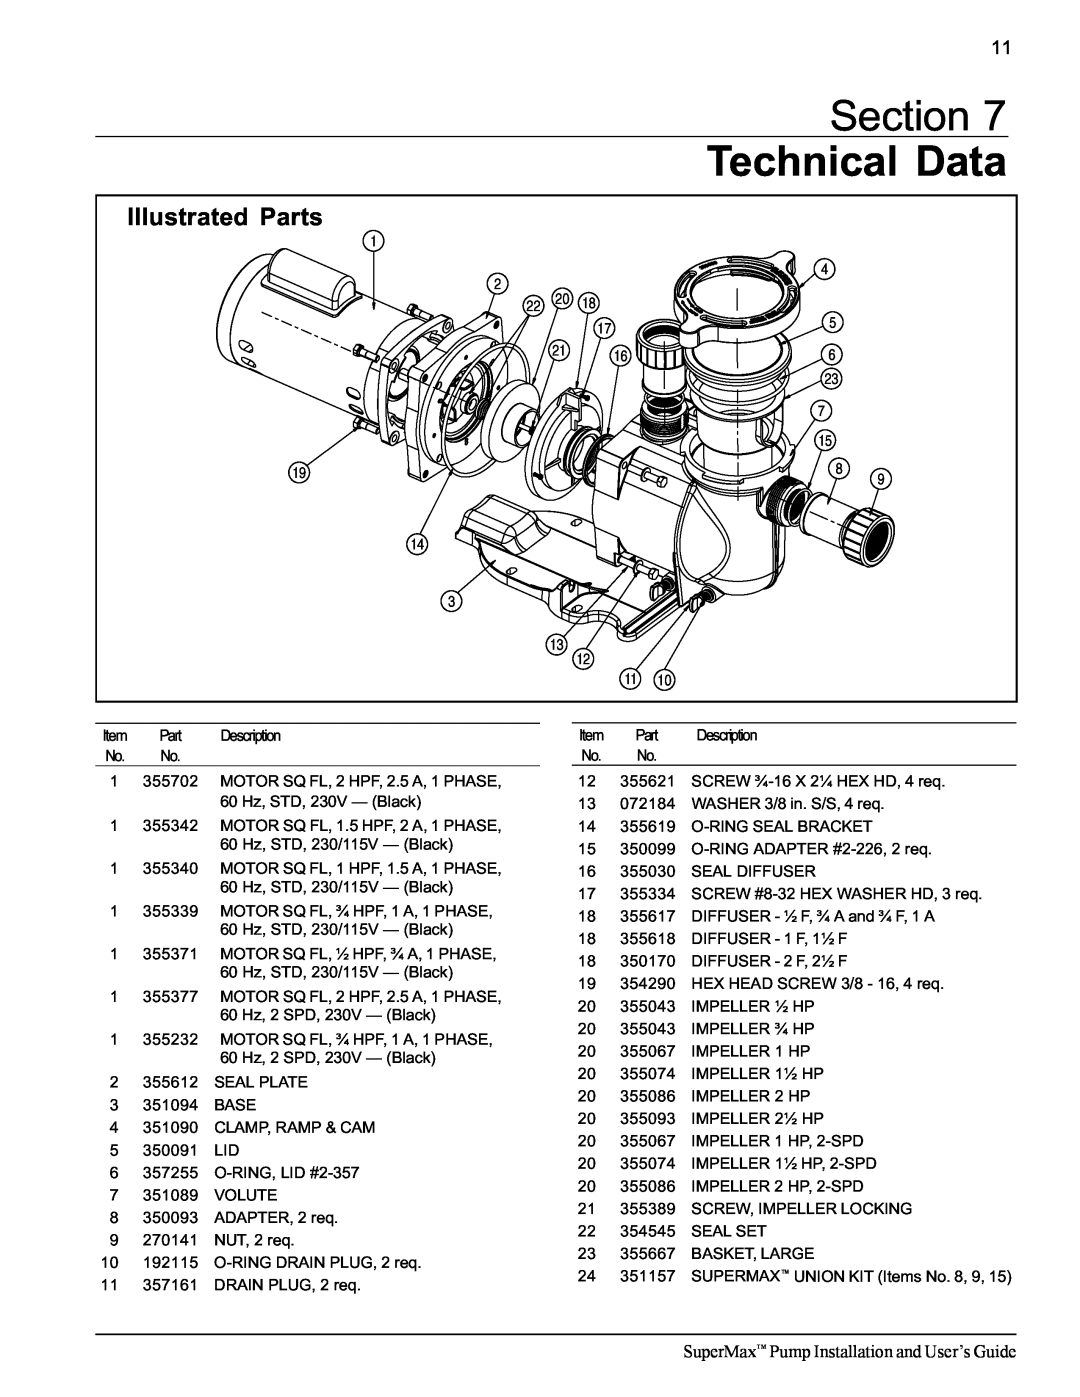 Pentair Section Technical Data, Illustrated Parts, SuperMax Pump Installation and User’s Guide 